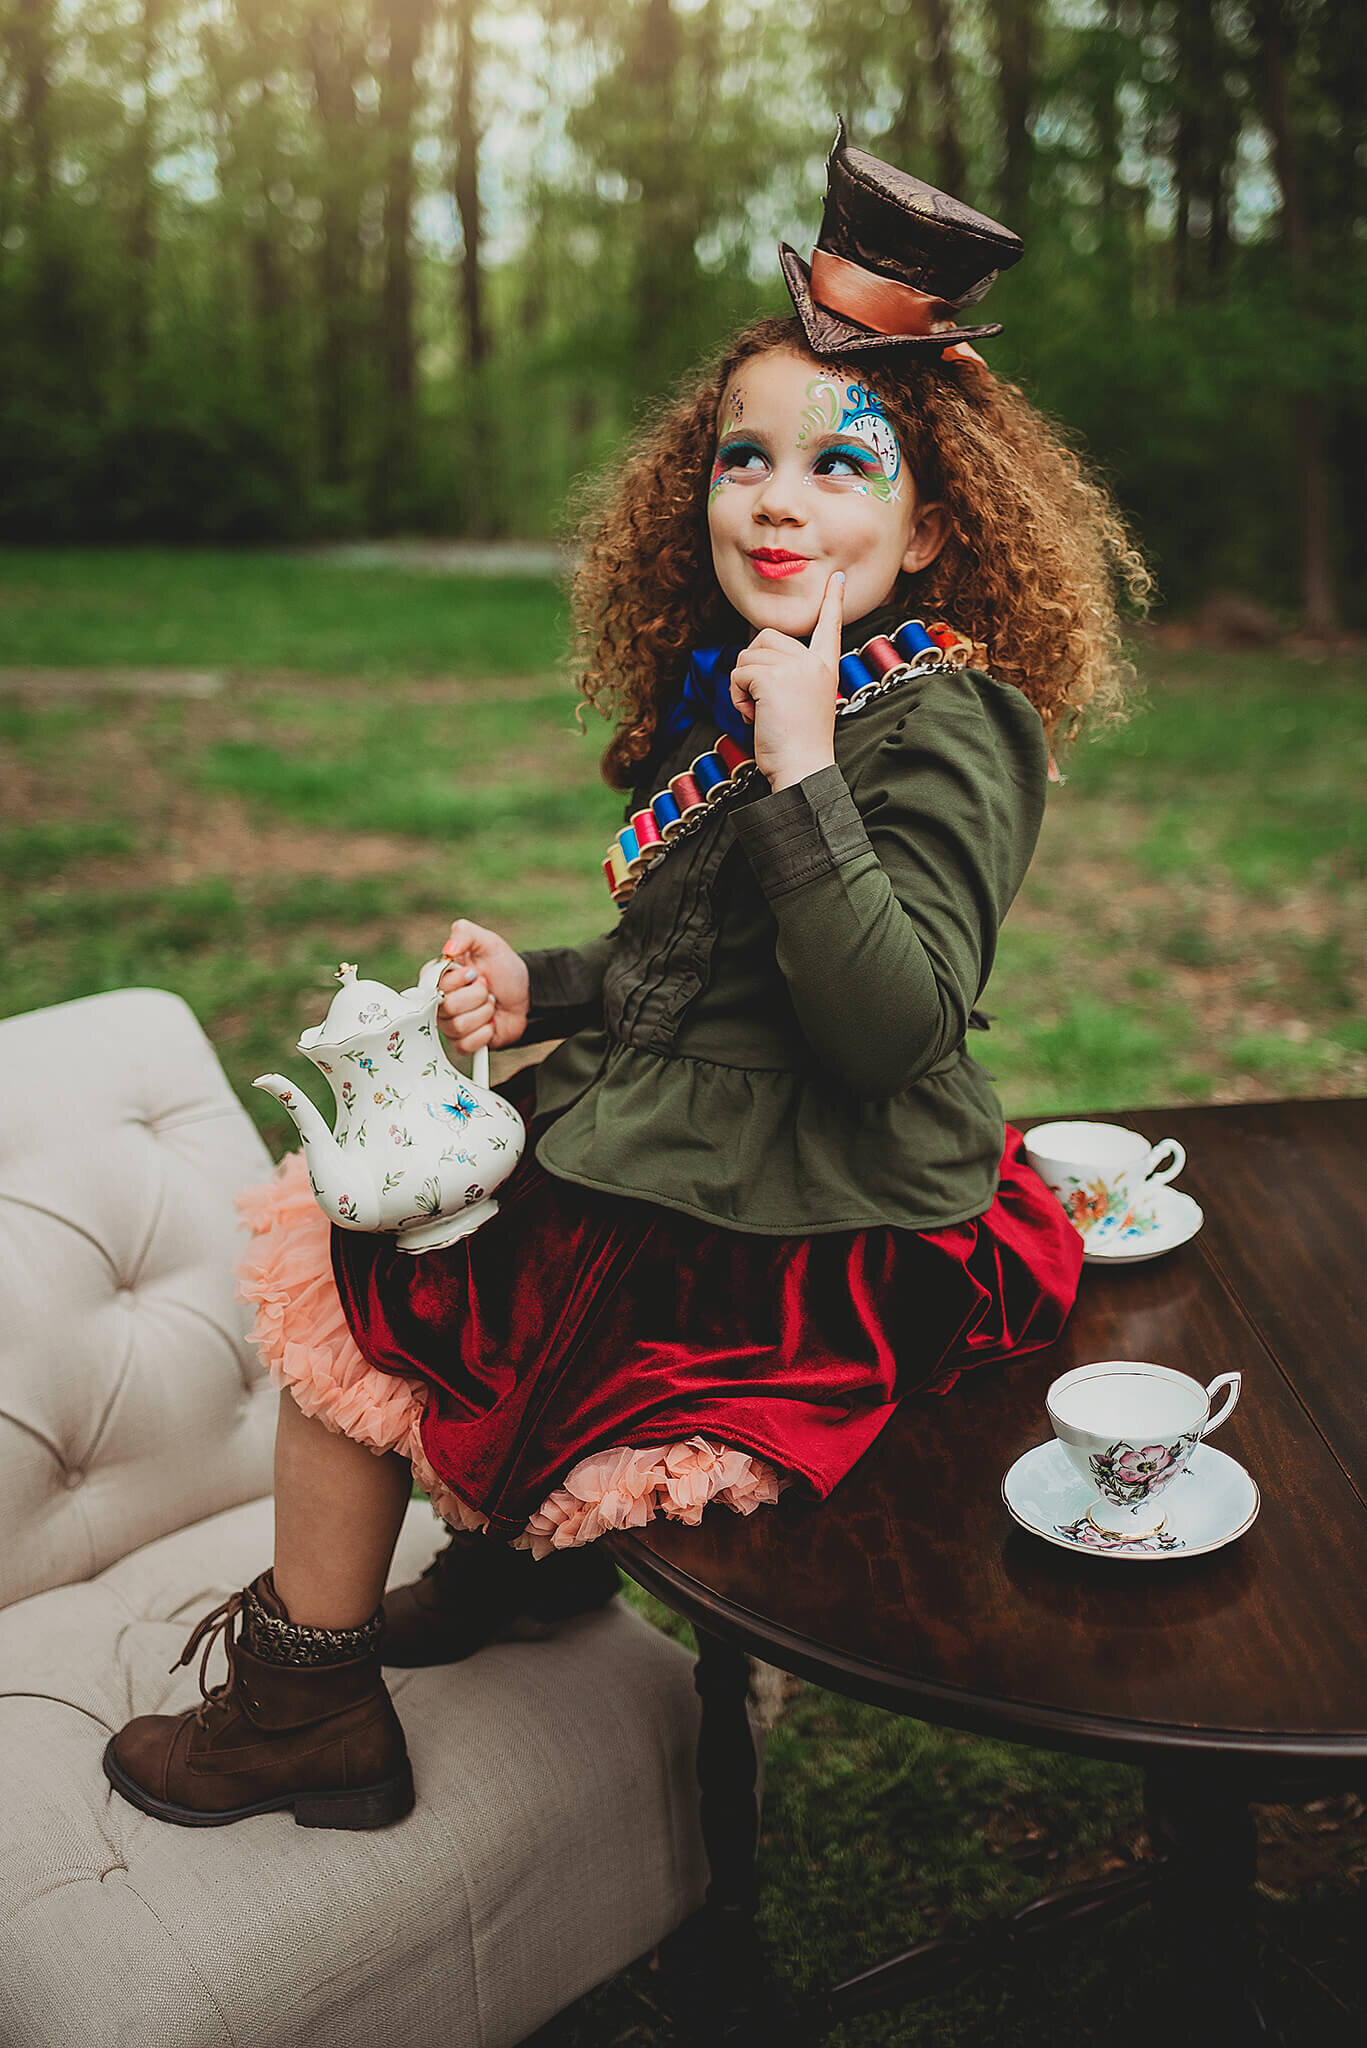 Girl with orange hair and face makeup sitting on table with tea set